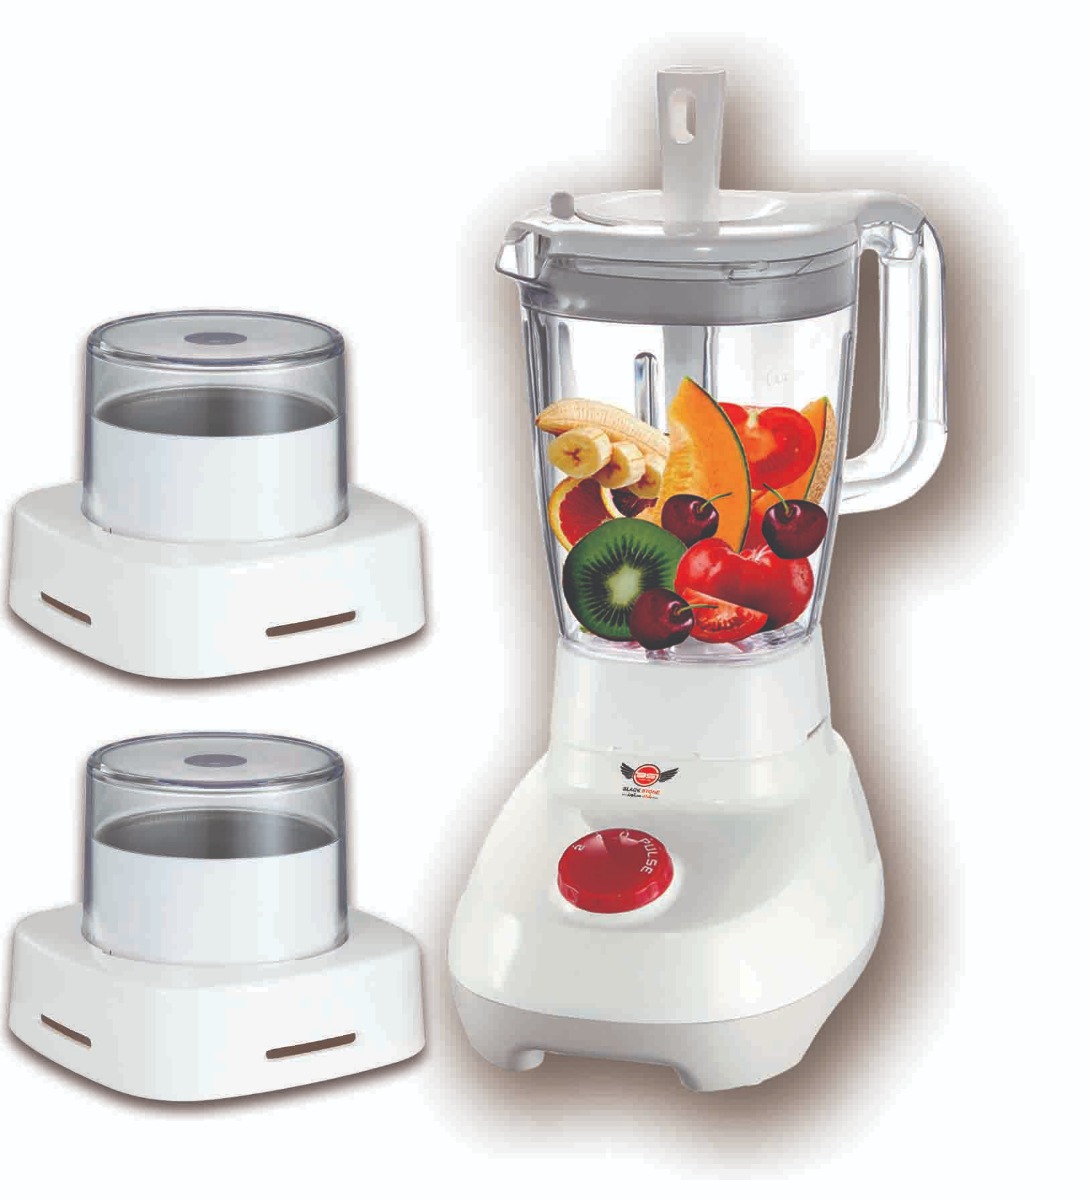 Black Stone Countertop Blender with Attachments, 2 Liters, 600W, White - BR-600